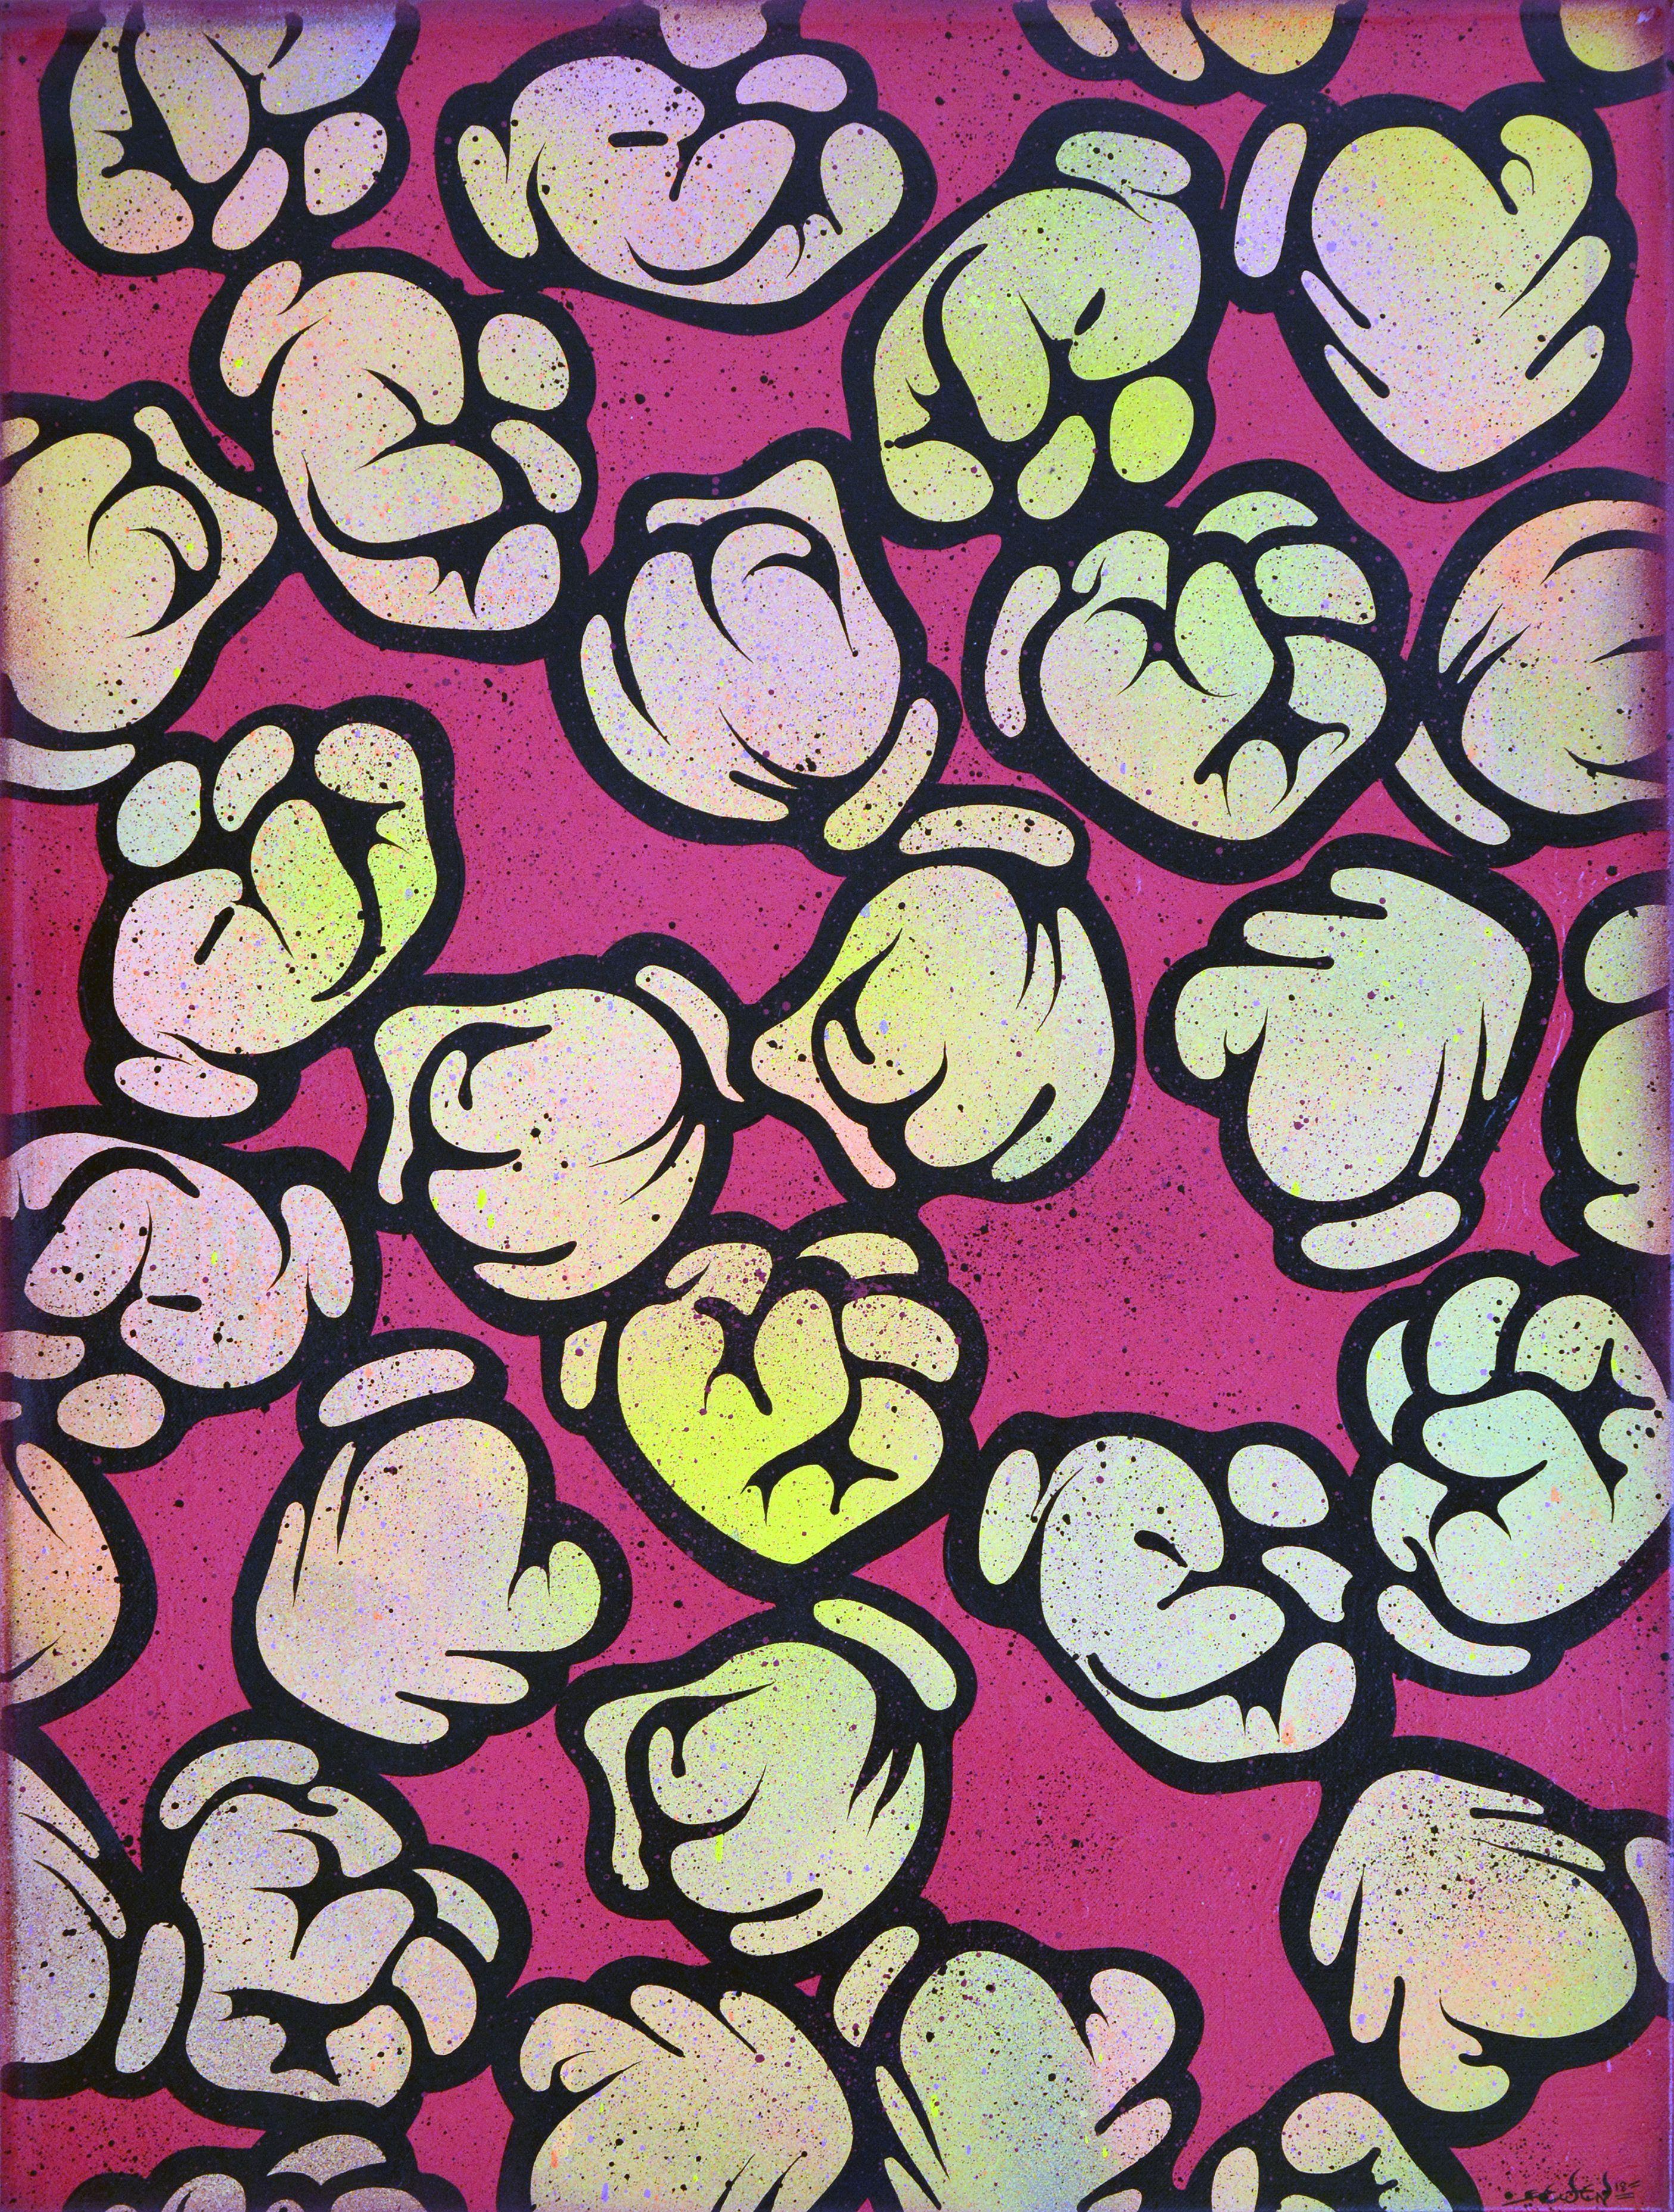 Resist, be different, fight the system :)  This is an original hand painted artwork by Ewen Gur.  Technique used: acrylic and ink on canvas.  High-quality colors (UV-Light resistant) are used to protect the artwork.  The artwork is signed and ready